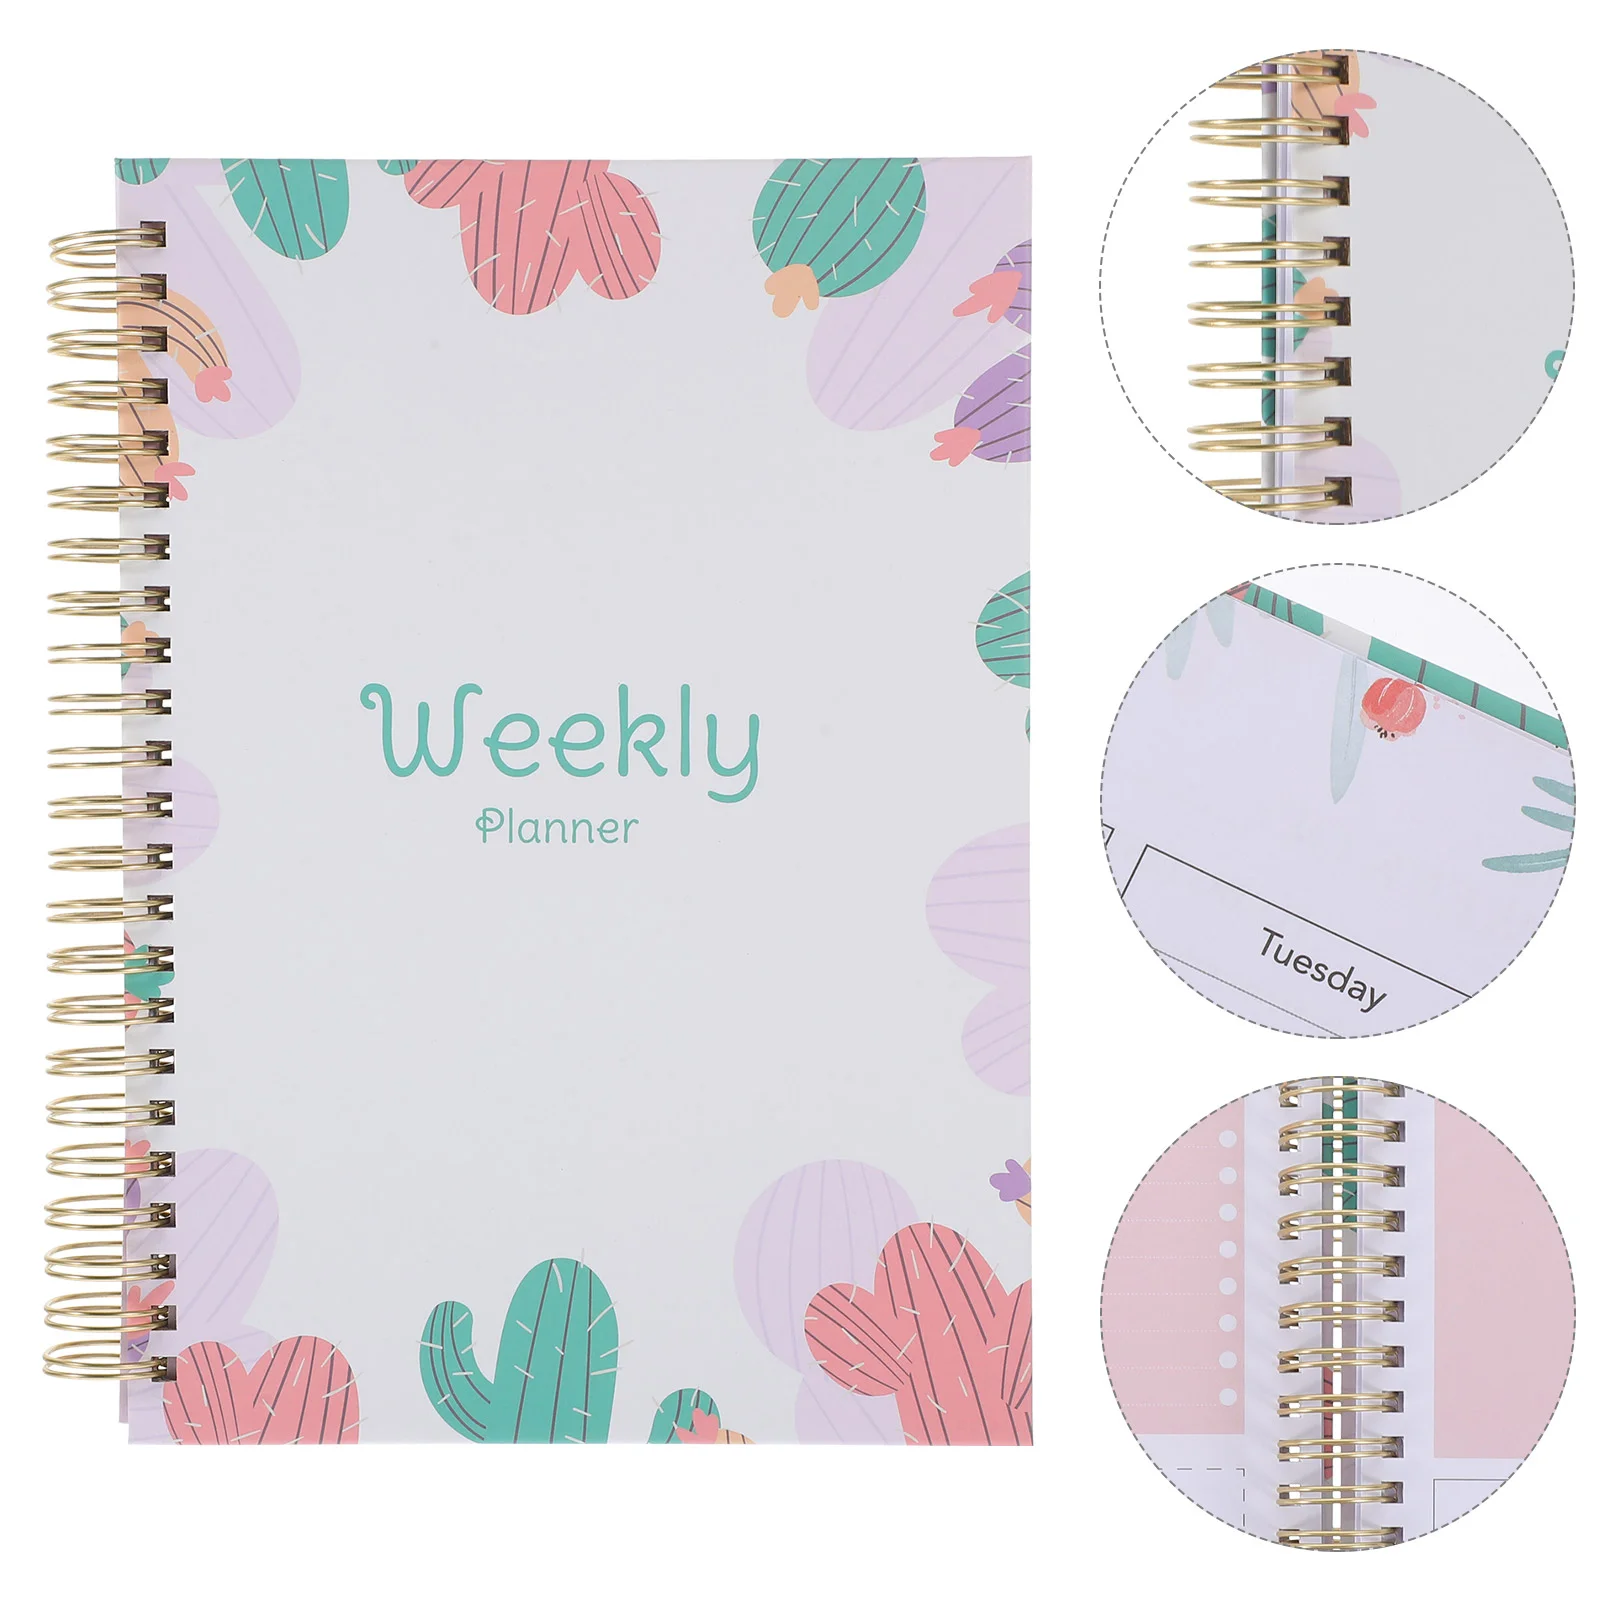 Household Planner Daily Week Moonth Planning Agenda Notebook Diary Coil Designed Academic Planner Organizer Office Supplies